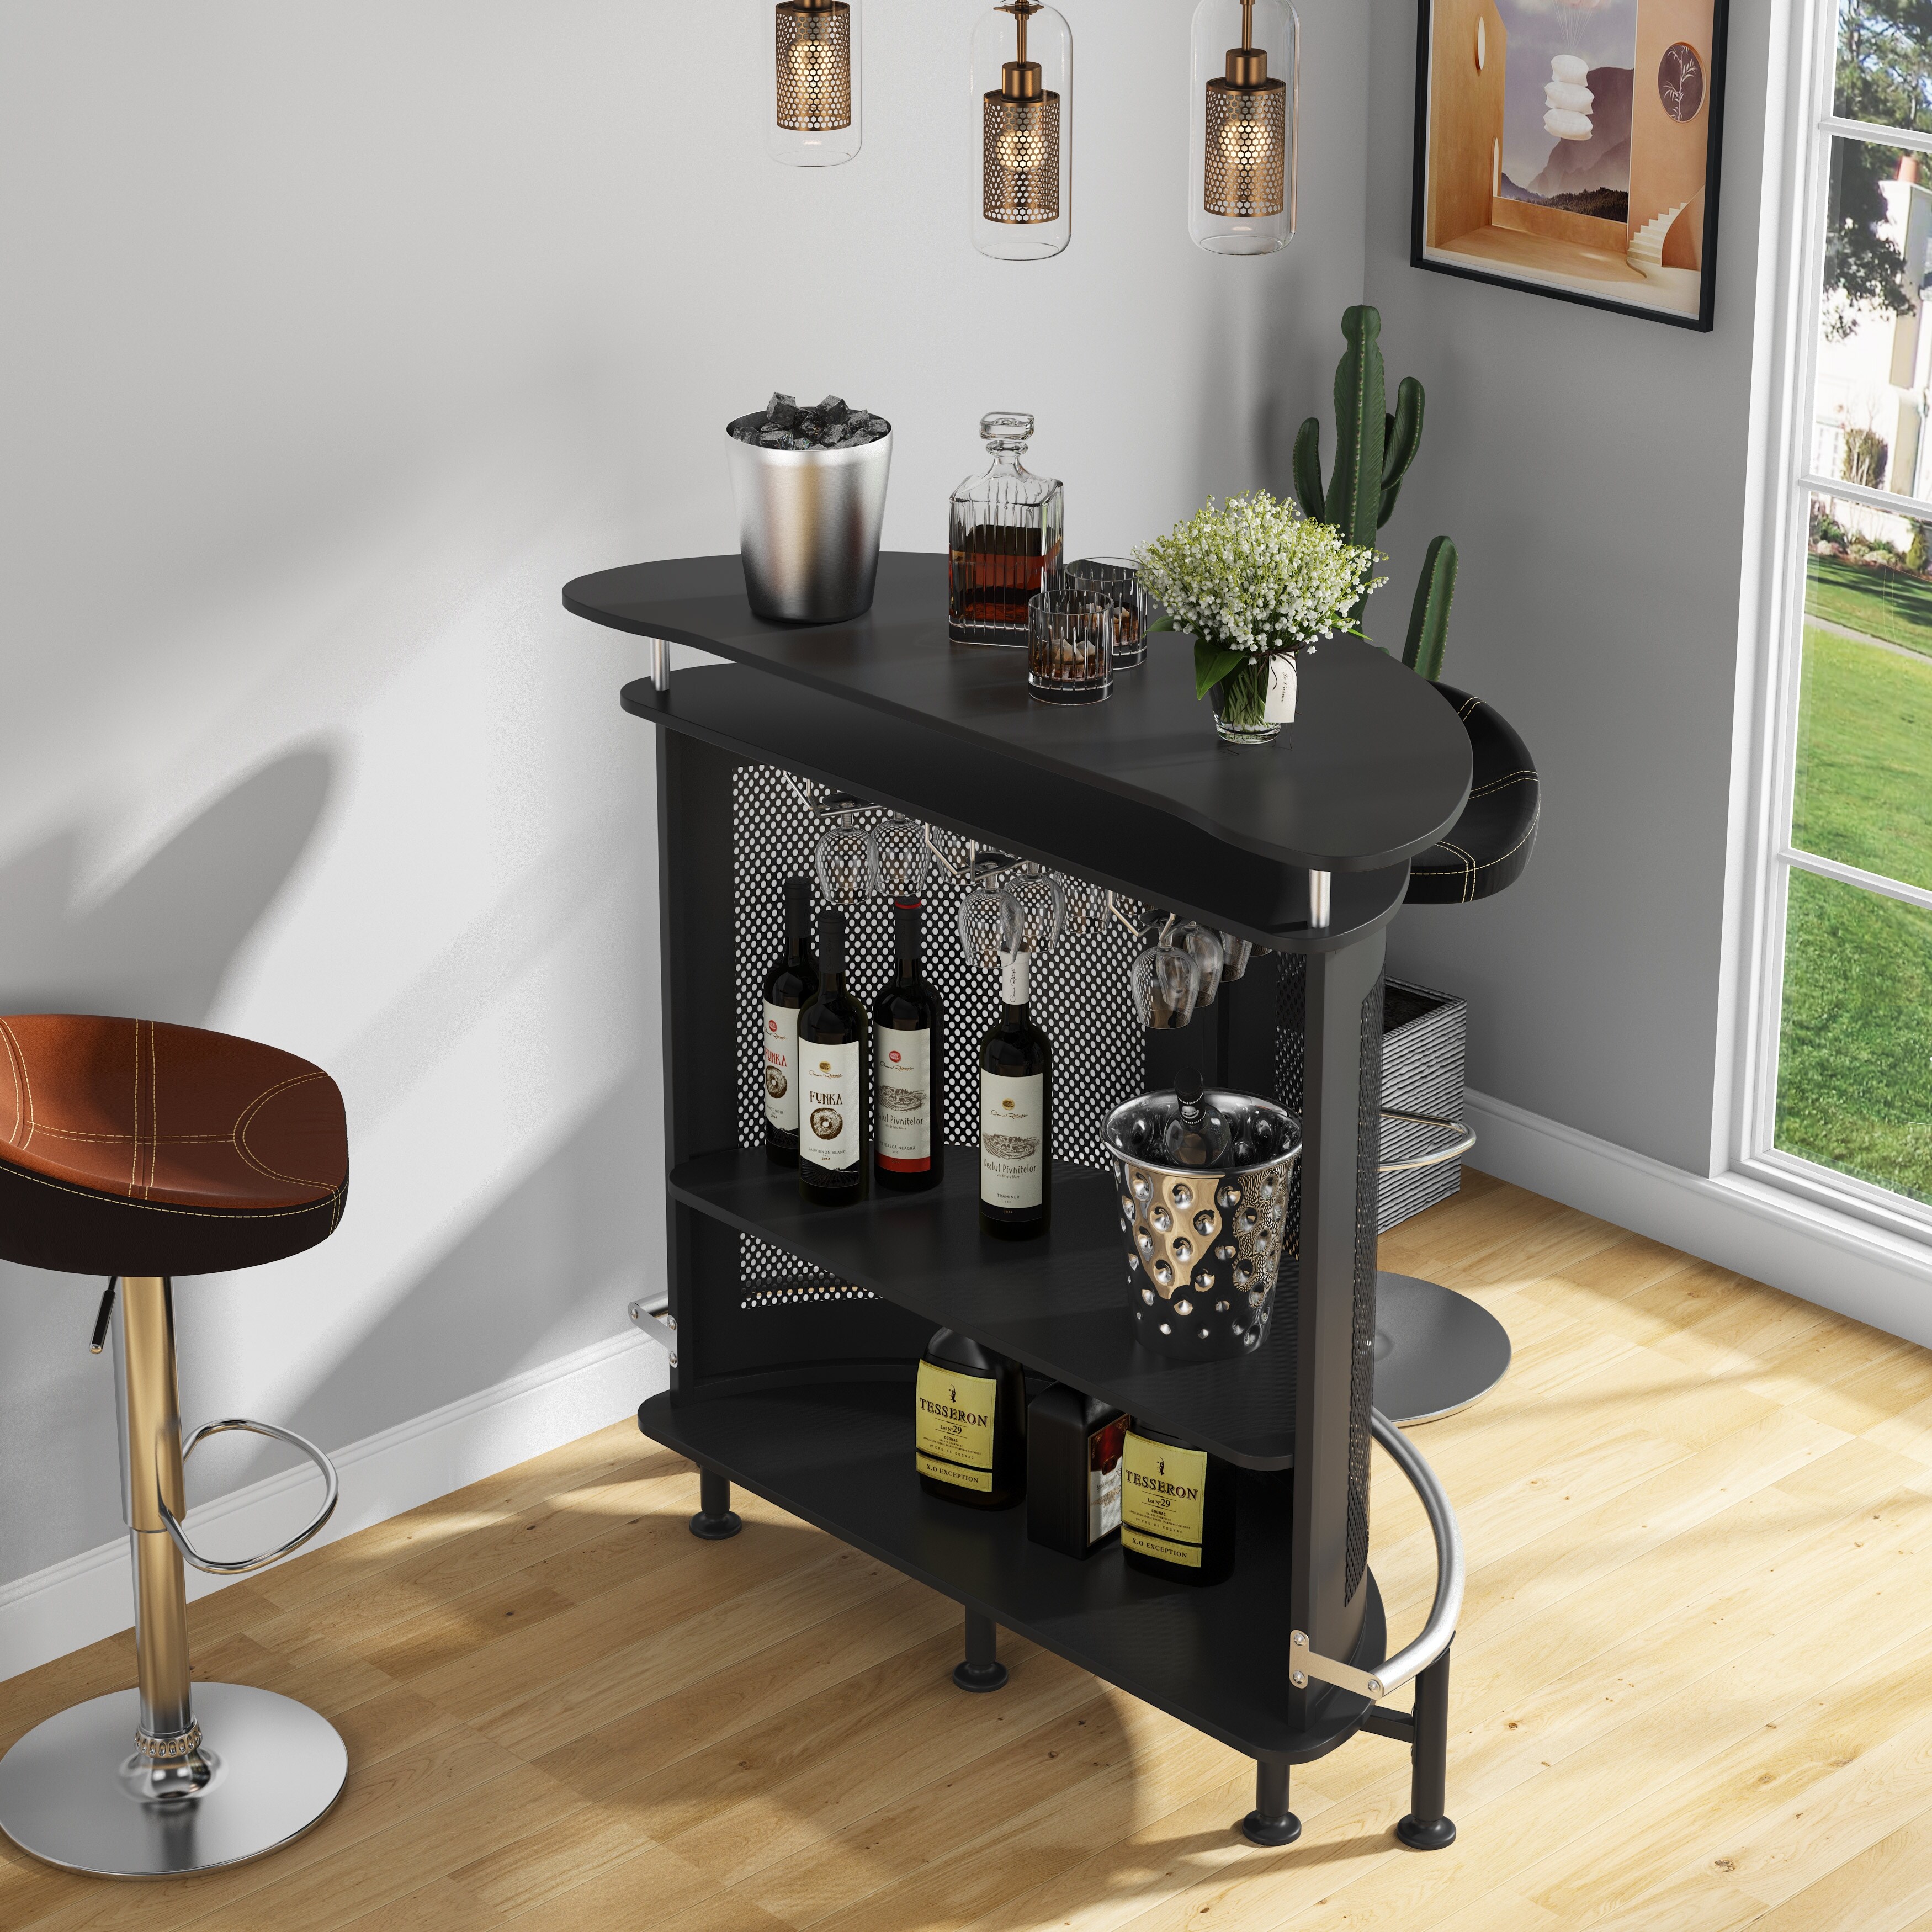 https://ak1.ostkcdn.com/images/products/is/images/direct/7a0483e72792ddb16e958928bcb65383af0353a9/3-Tier-Home-Liquor-Bar-Table%2C-Bar-Unit-with-Wine-Glass-Holders.jpg